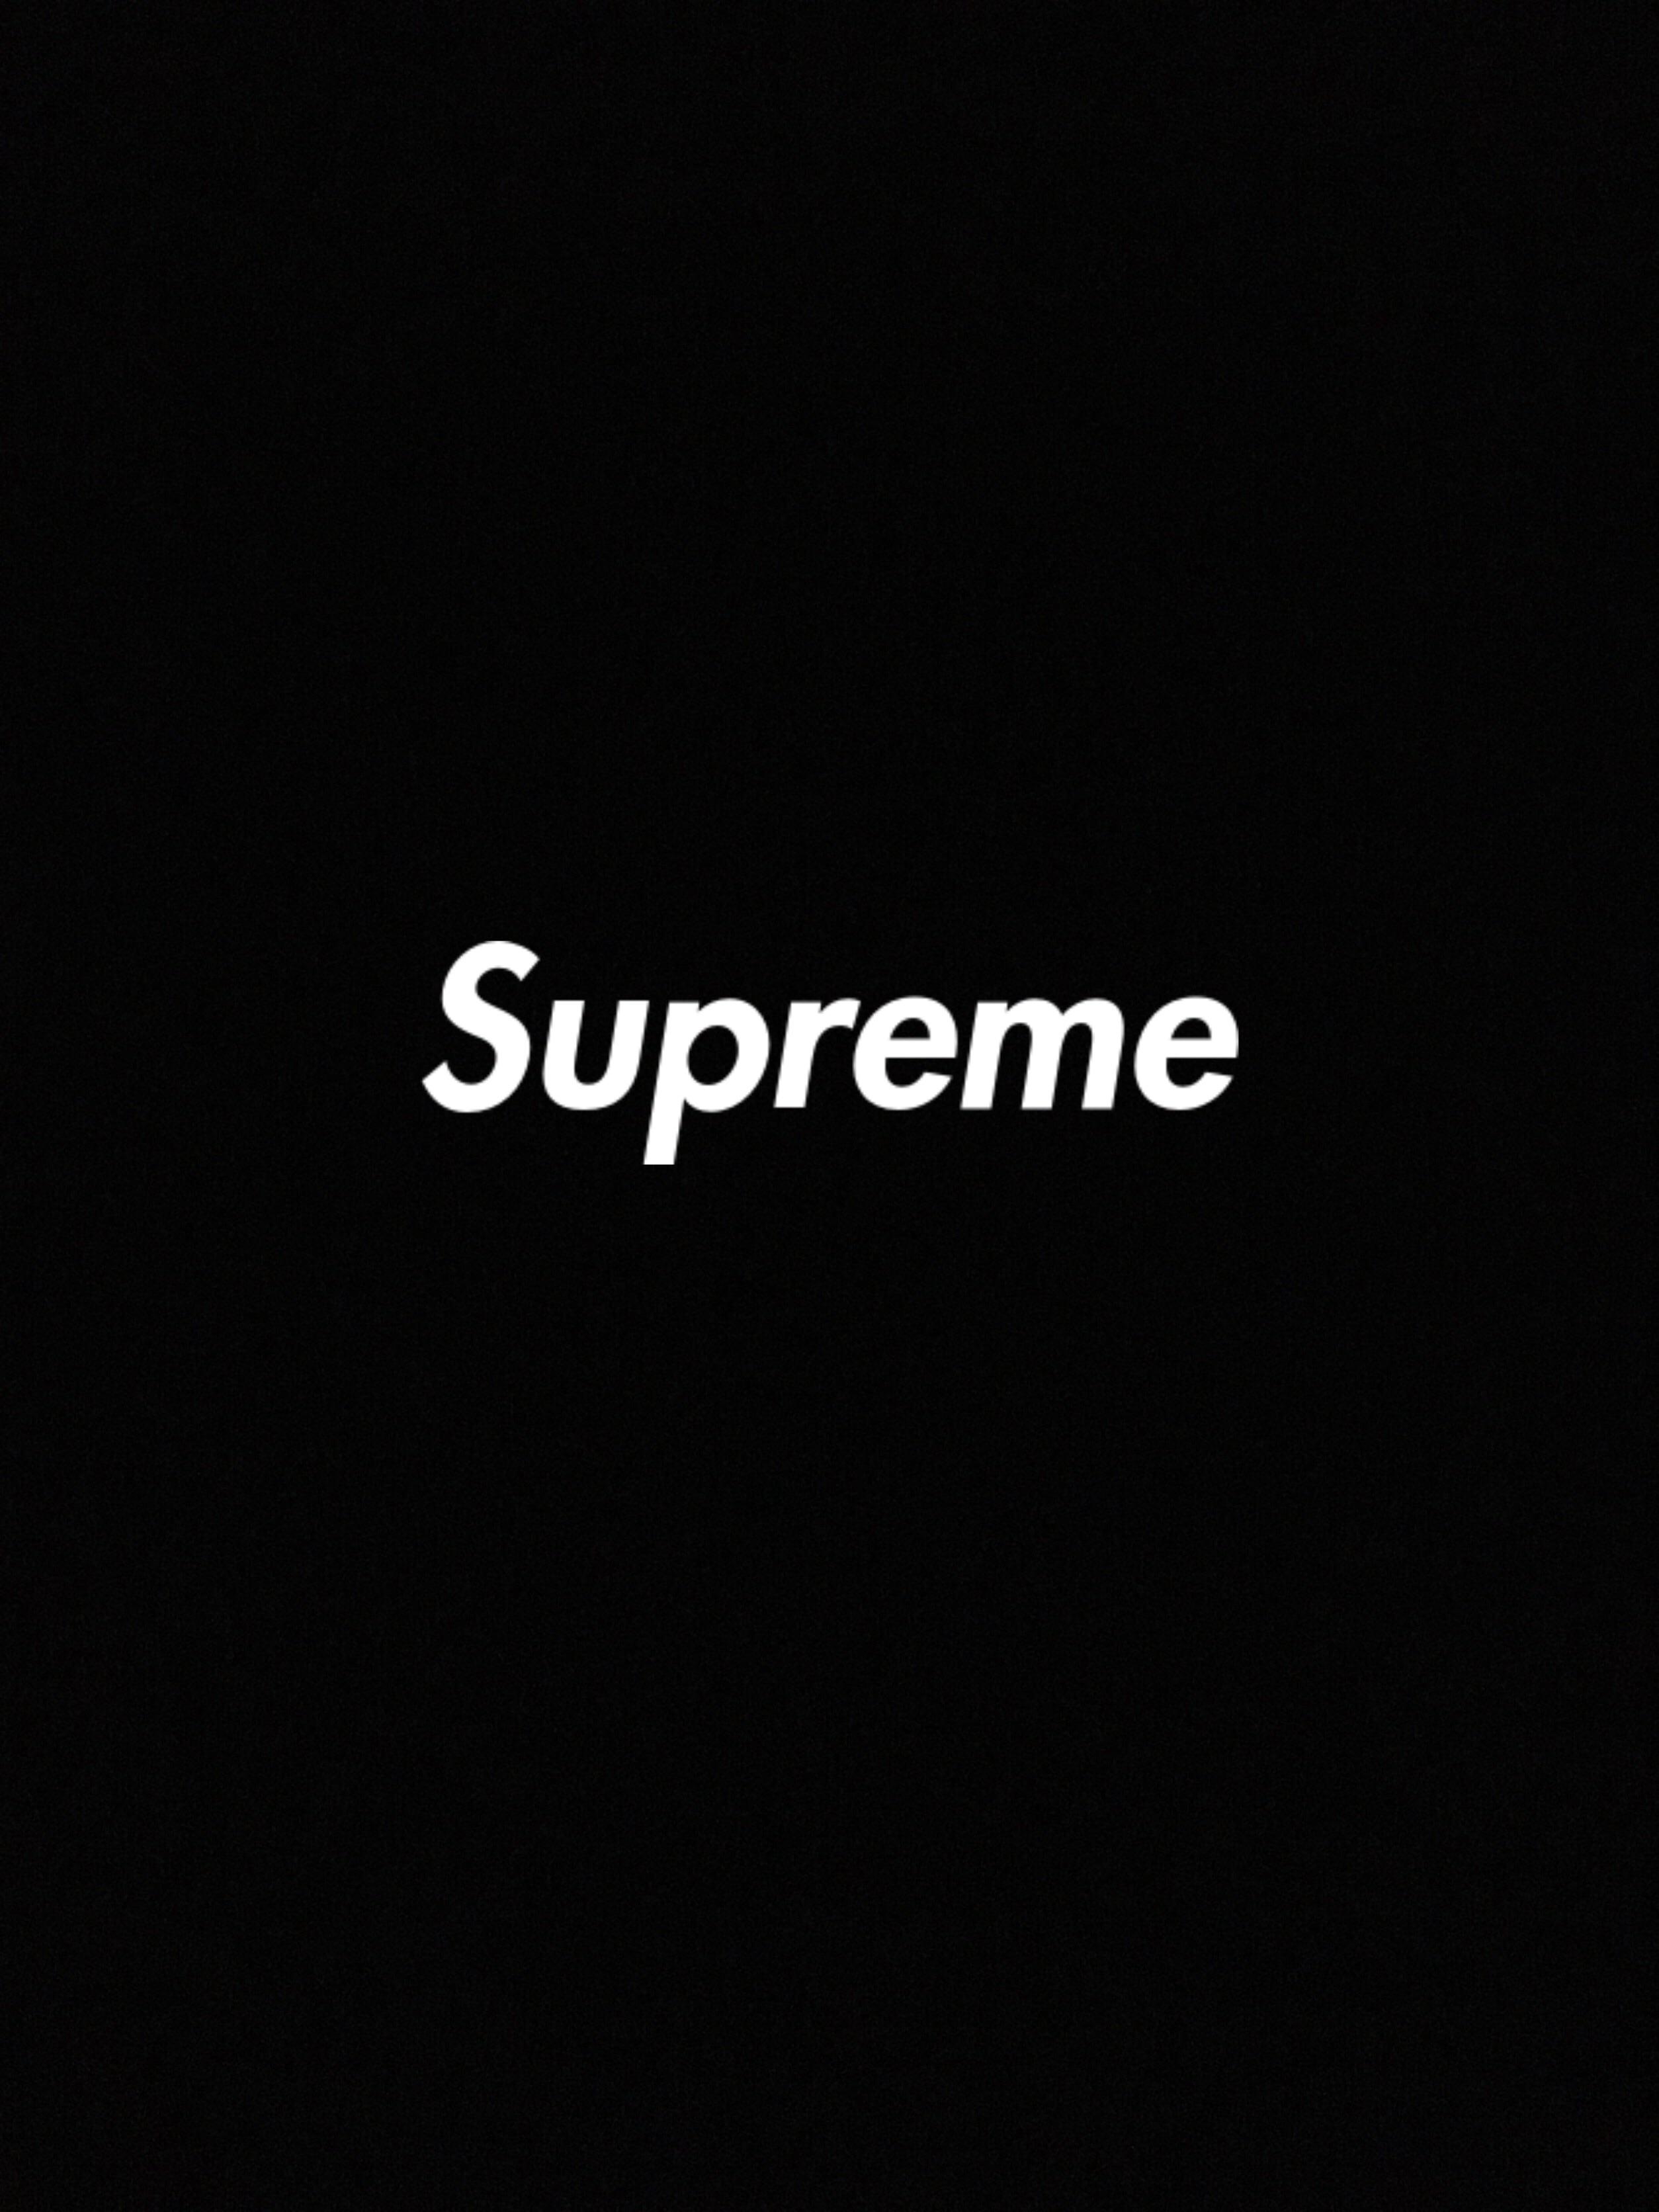 Supreme Iphone X Wallpapers